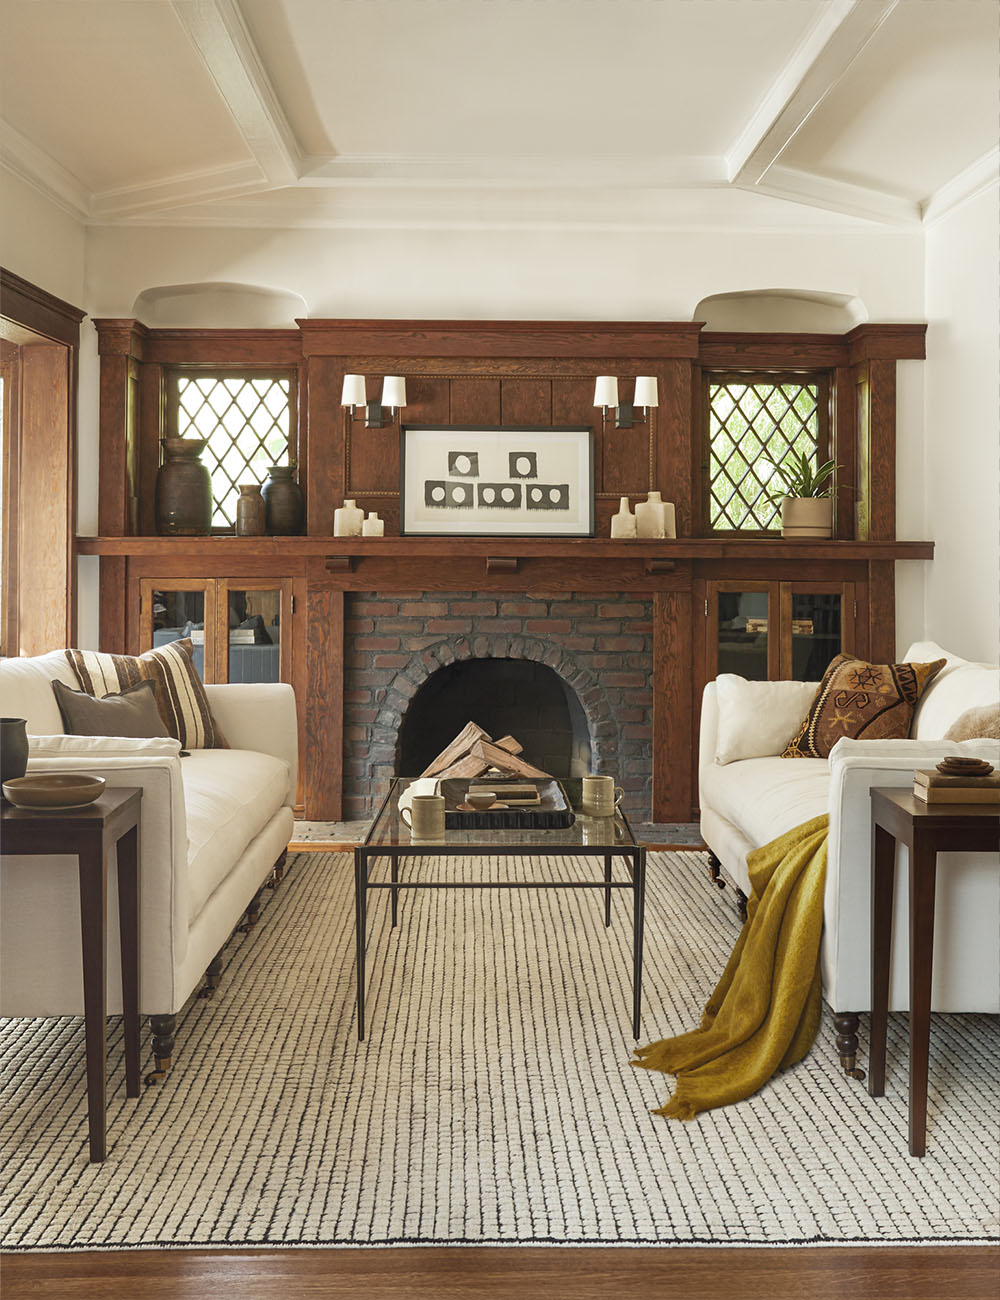 The subtly checked black and neutral Uma rug grounds this craftsman-style living room with two ivory sofas facing each other in front of a wooden fireplace.